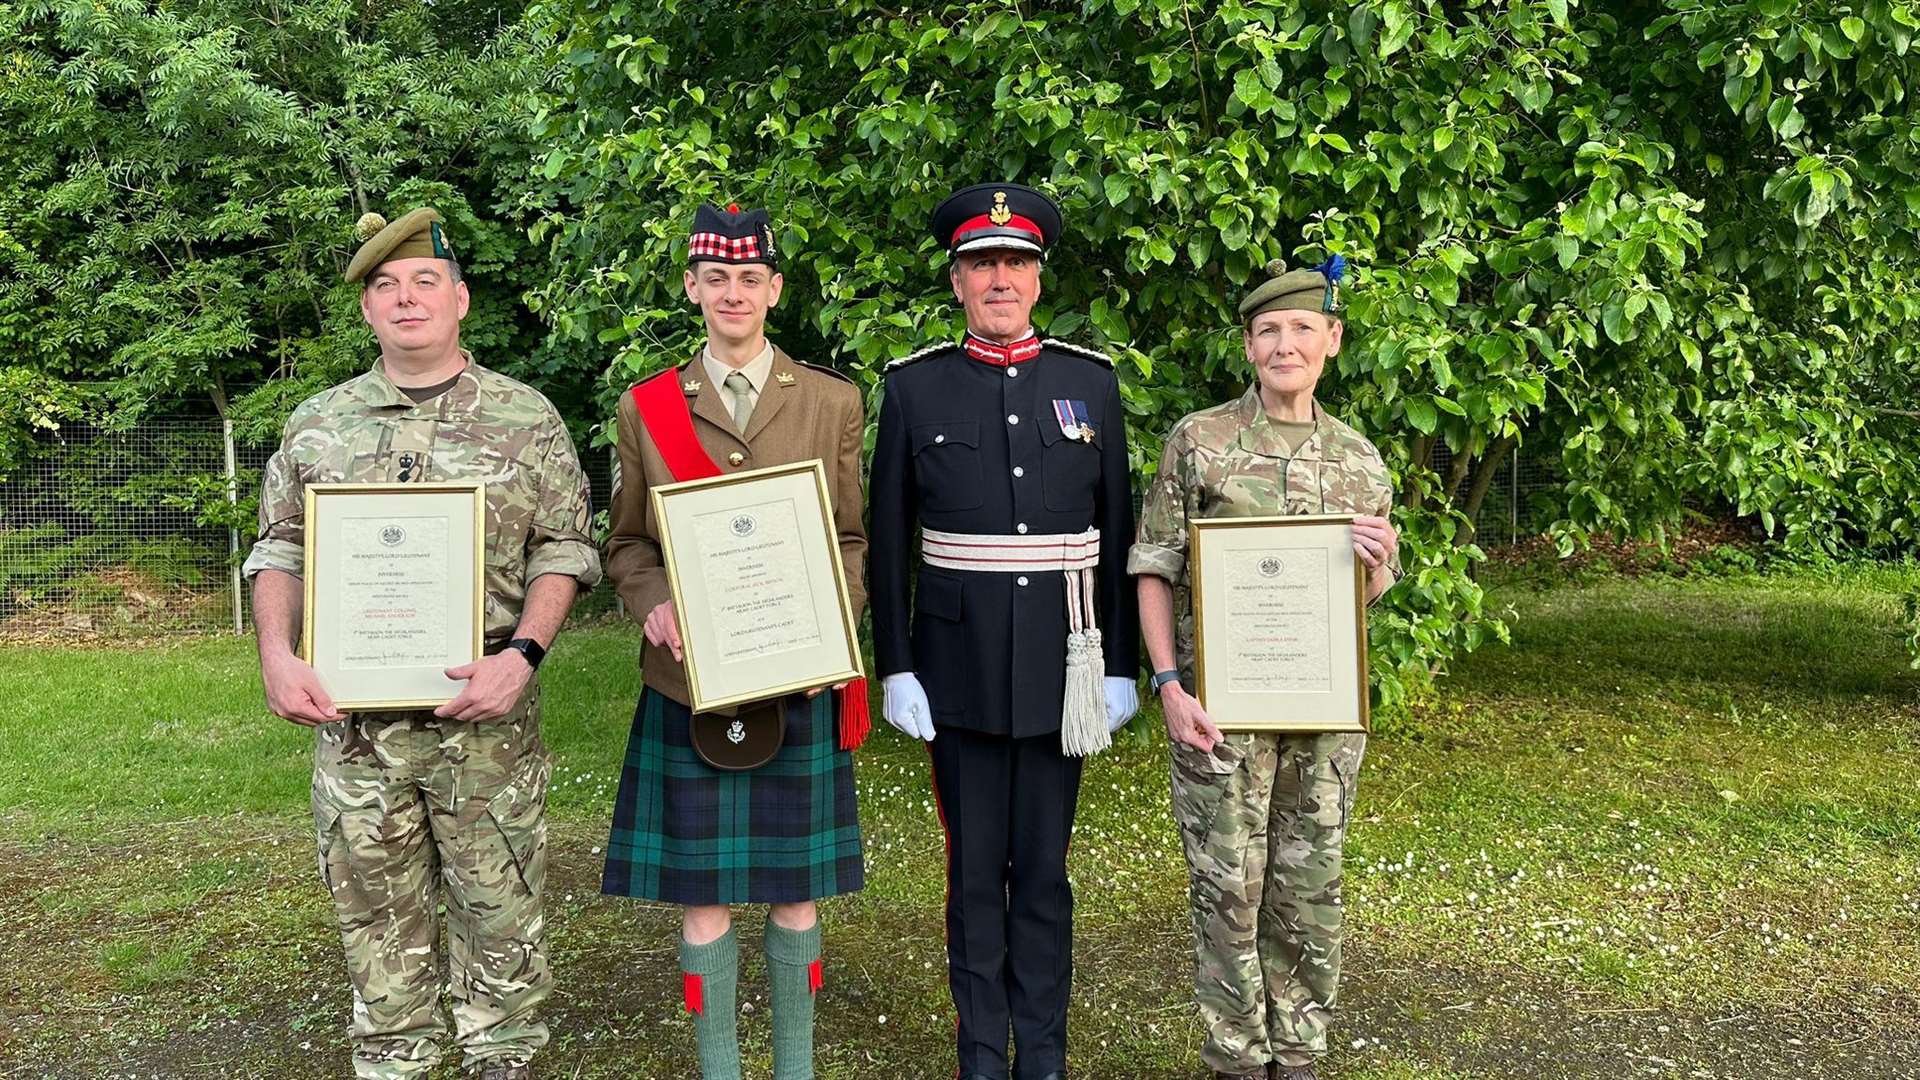 (L-R) Colonel Anderson, Cpl Bryson, Lord Lieutenant of Inverness James Wotherspoon and Capt Debra Ennis